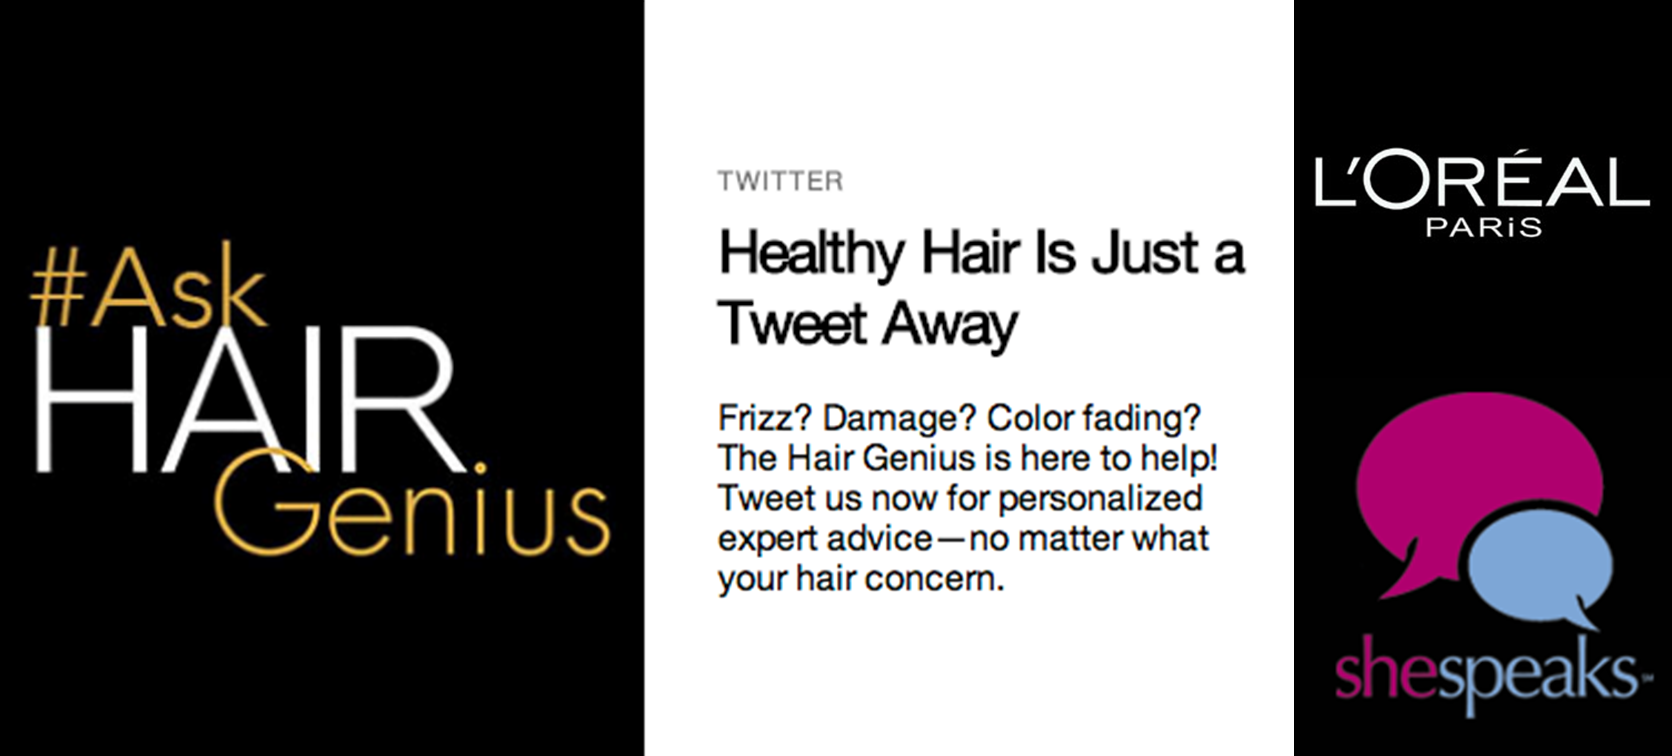 #AskHairGenius and #AdvancedHaircare - Logo - https://s39939.pcdn.co/wp-content/uploads/2018/11/LOrealSheSpeaks-1.png